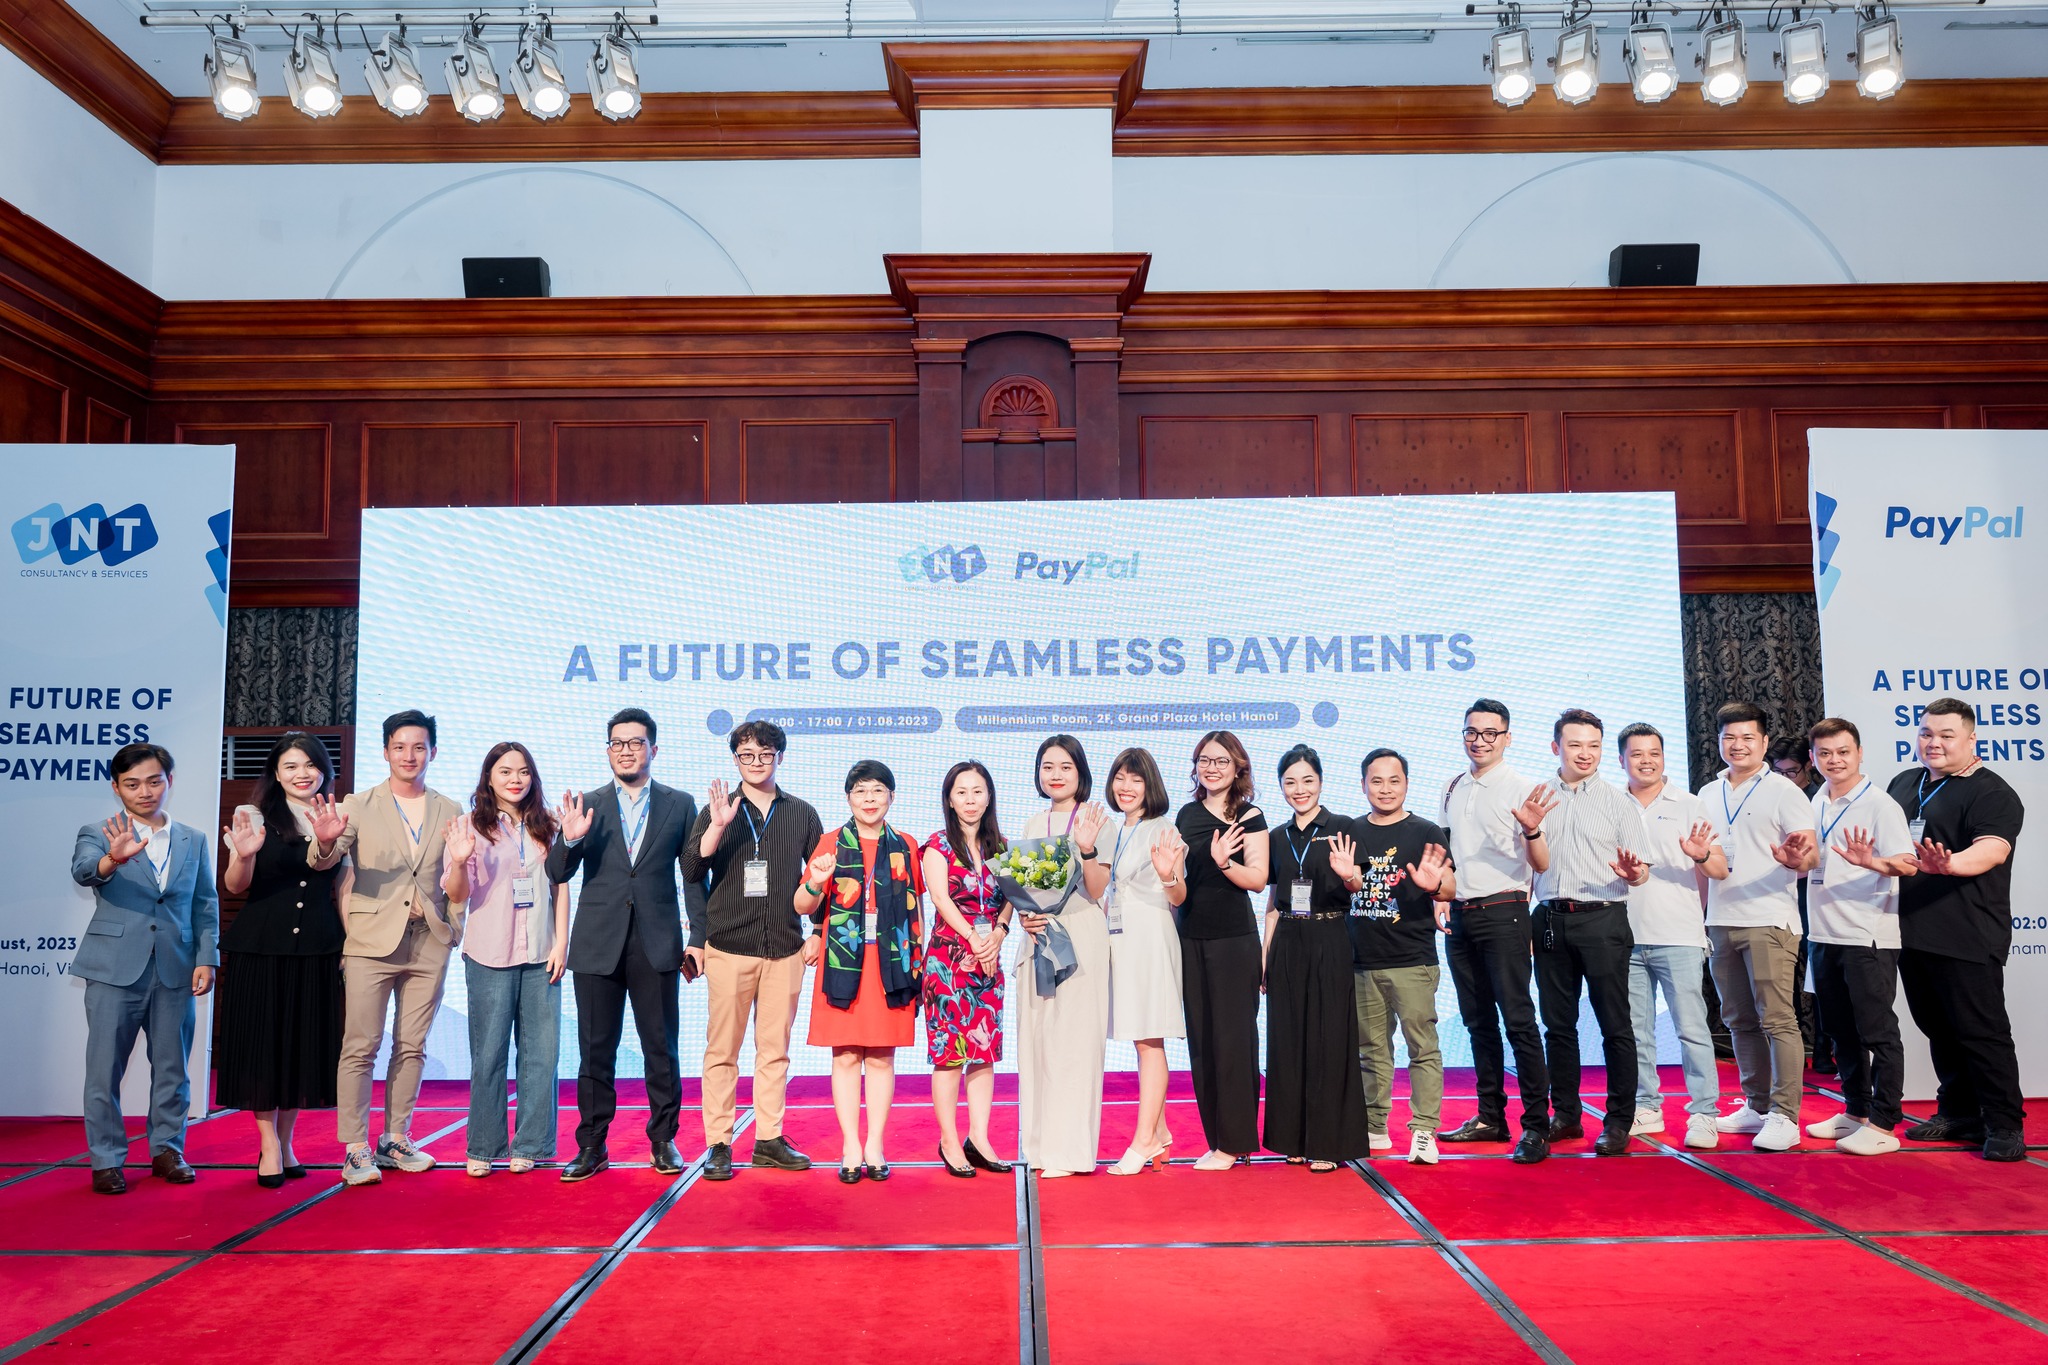 Sự kiện cổng thanh toán JNT x PayPal: A Future of Seamless Payments 2023